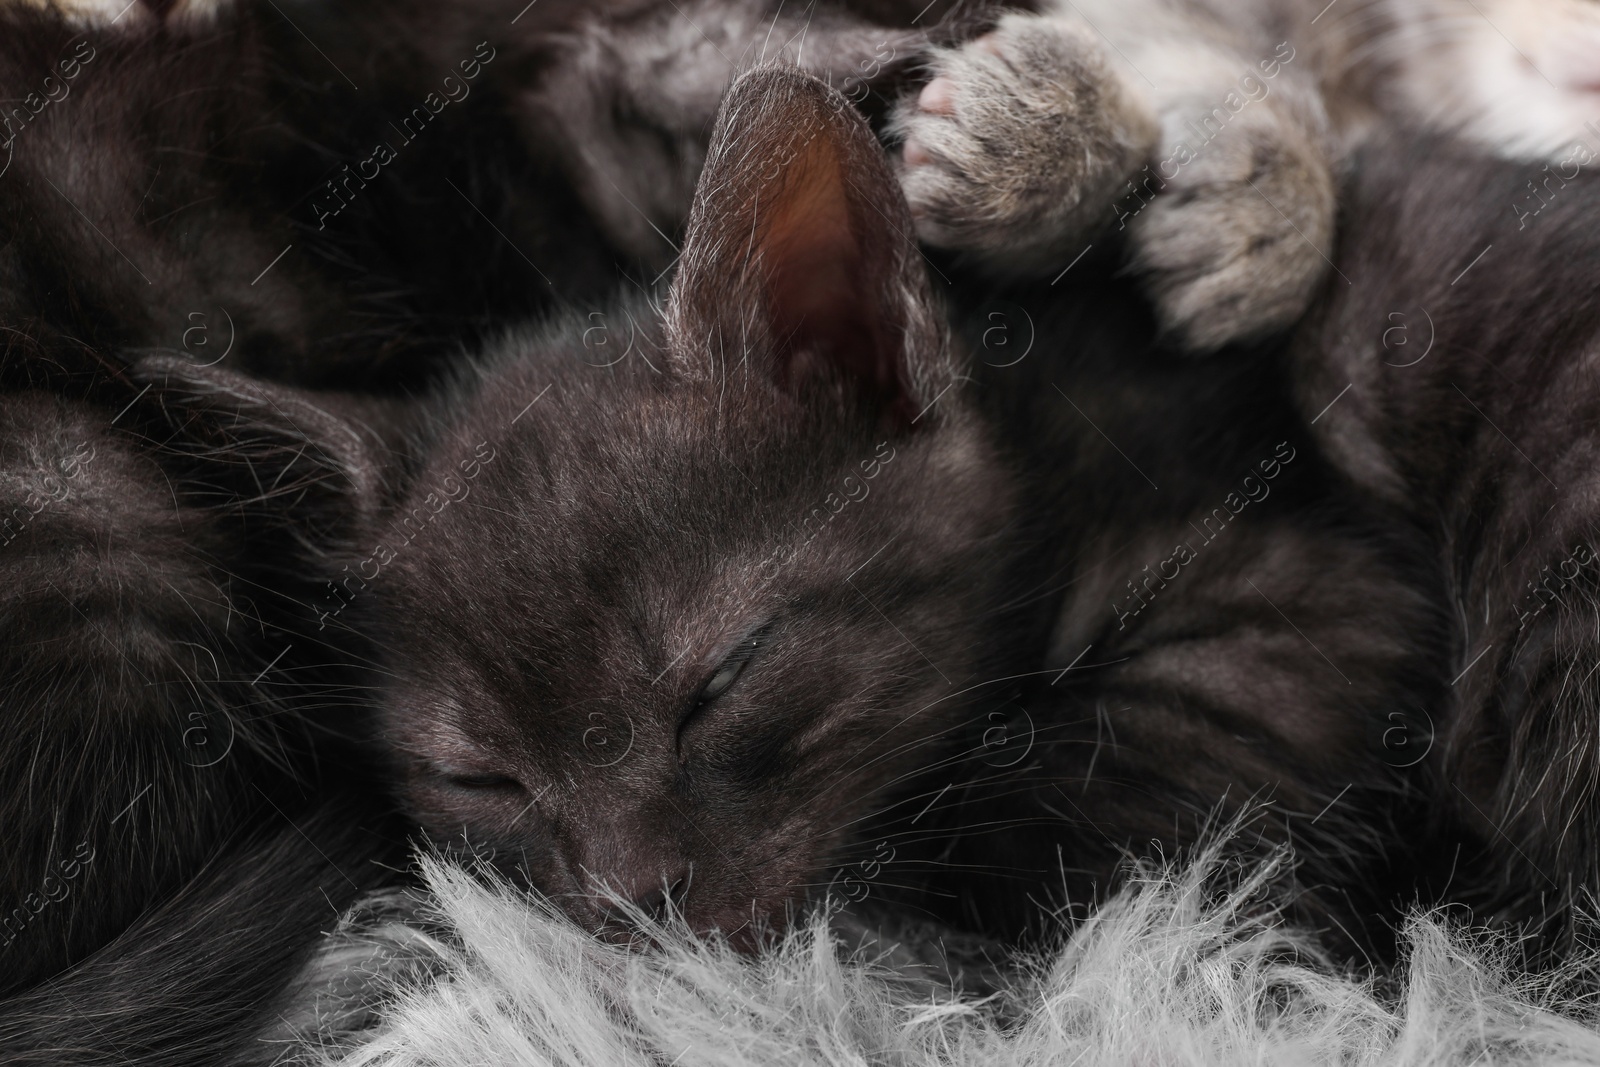 Photo of Cute fluffy kittens sleeping on faux fur. Baby animals